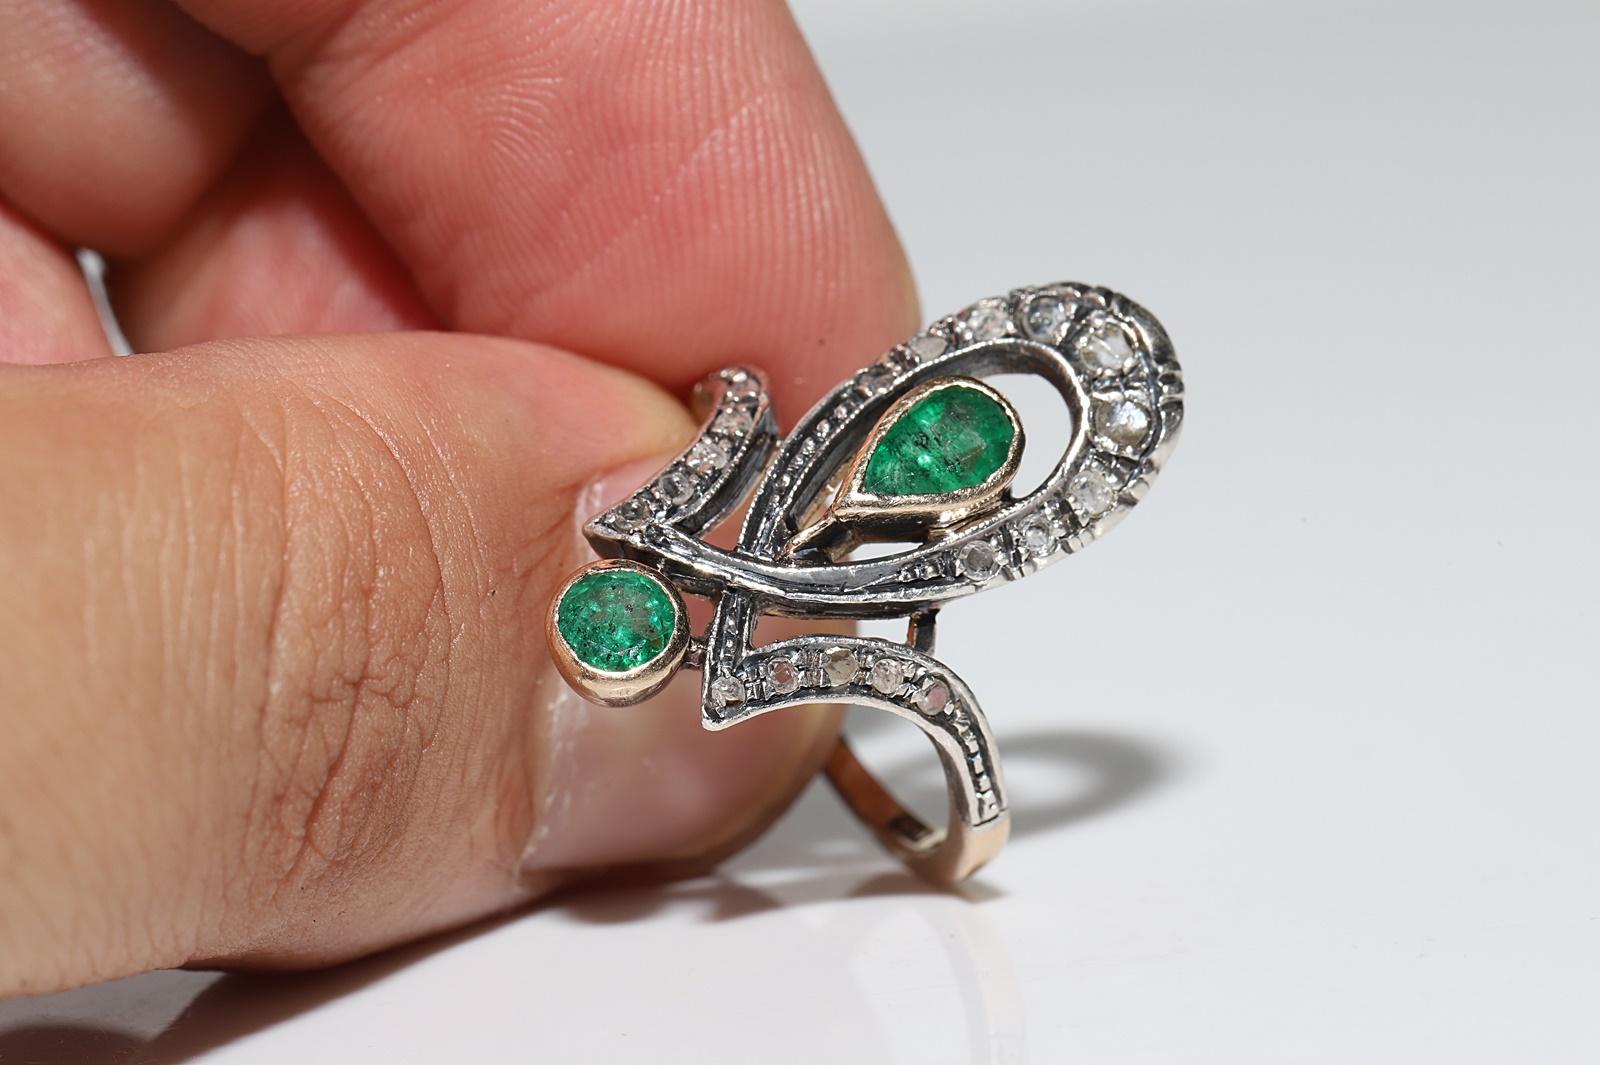 Antique Circa 1900s 12k Gold Top Silver Natural Rose Cut Diamond Emerald Ring For Sale 5